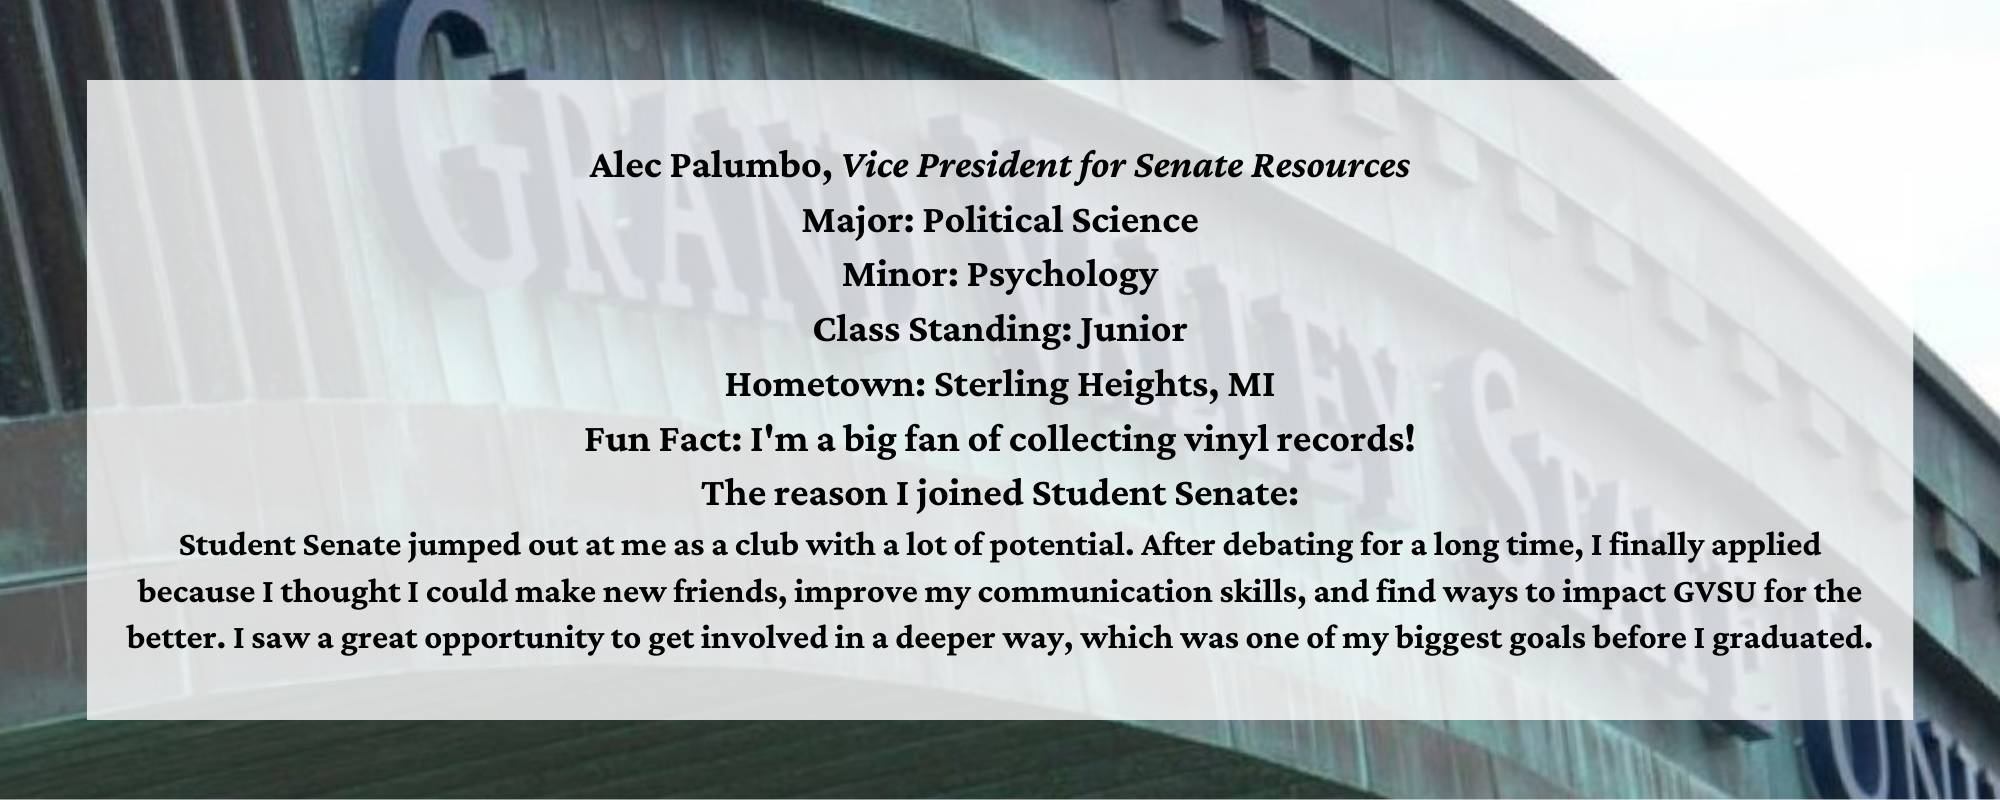 Alec Palumbo, Vice President for Senate Resources. Major: Political Science. Minor: Psychology. Class Standing: Junior. Hometown: Sterling Heights, MI. Fun Fact: I'm a big fan of collecting vinyl records! The reason I joined Student Senate:  Student Senate jumped out at me as a club with a lot of potential. After debating for a long time, I finally applied because I thought I could make new friends, improve my communication skills, and find ways to impact GVSU for the better. I saw a great opportunity to get involved in a deeper way, which was one of my biggest goals before I graduated.